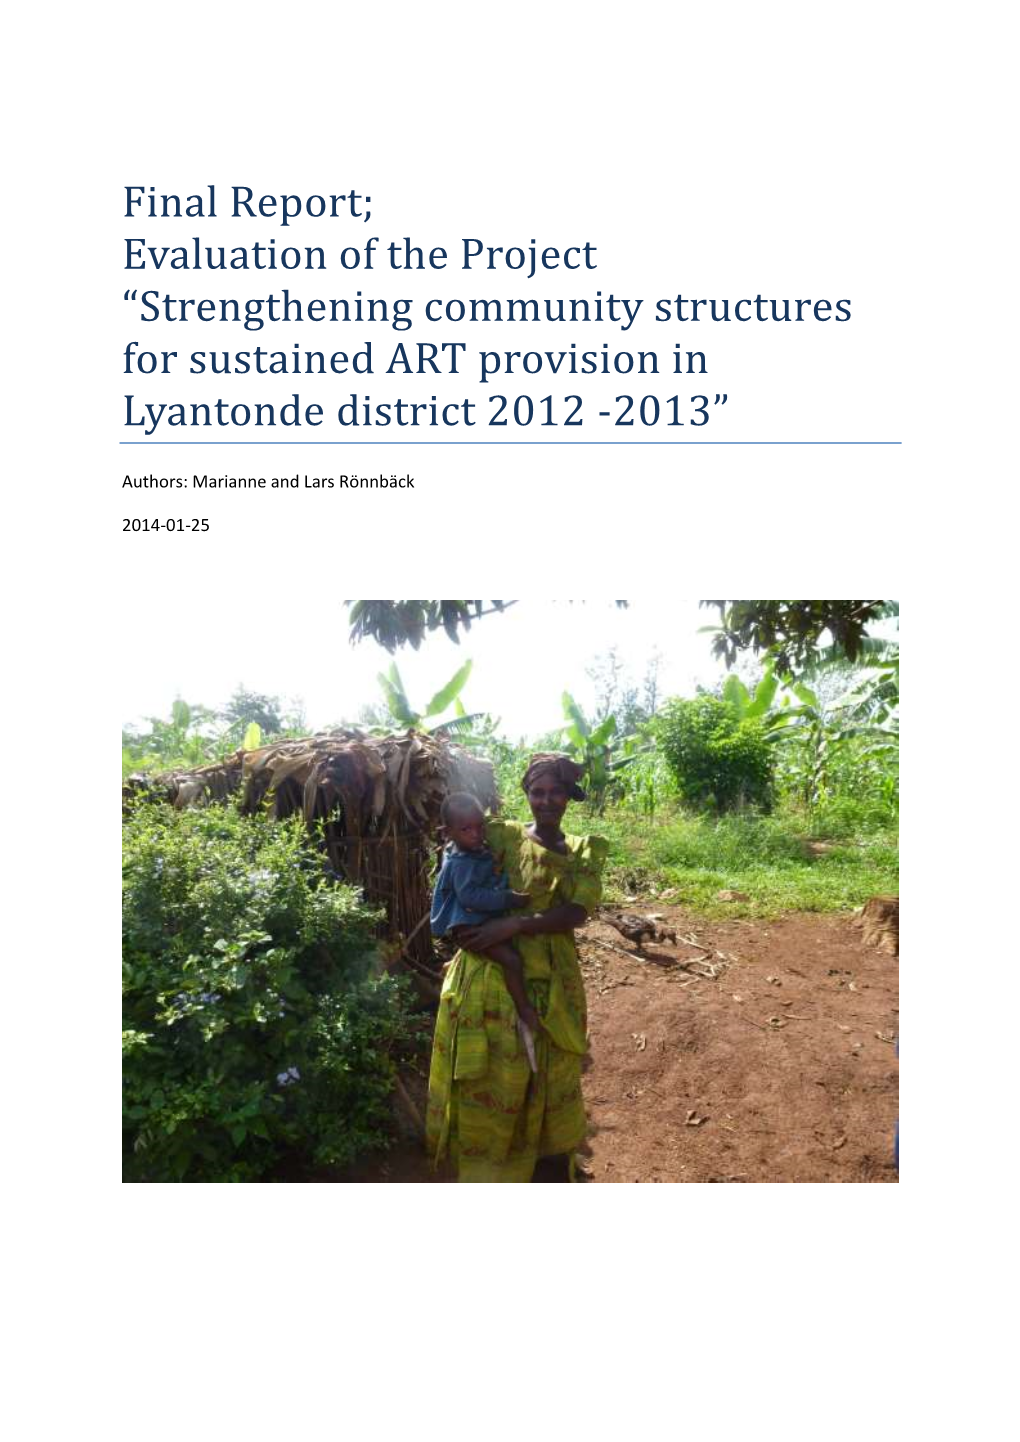 Final Report; Evaluation of the Project “Strengthening Community Structures for Sustained ART Provision in Lyantonde District 2012 -2013”